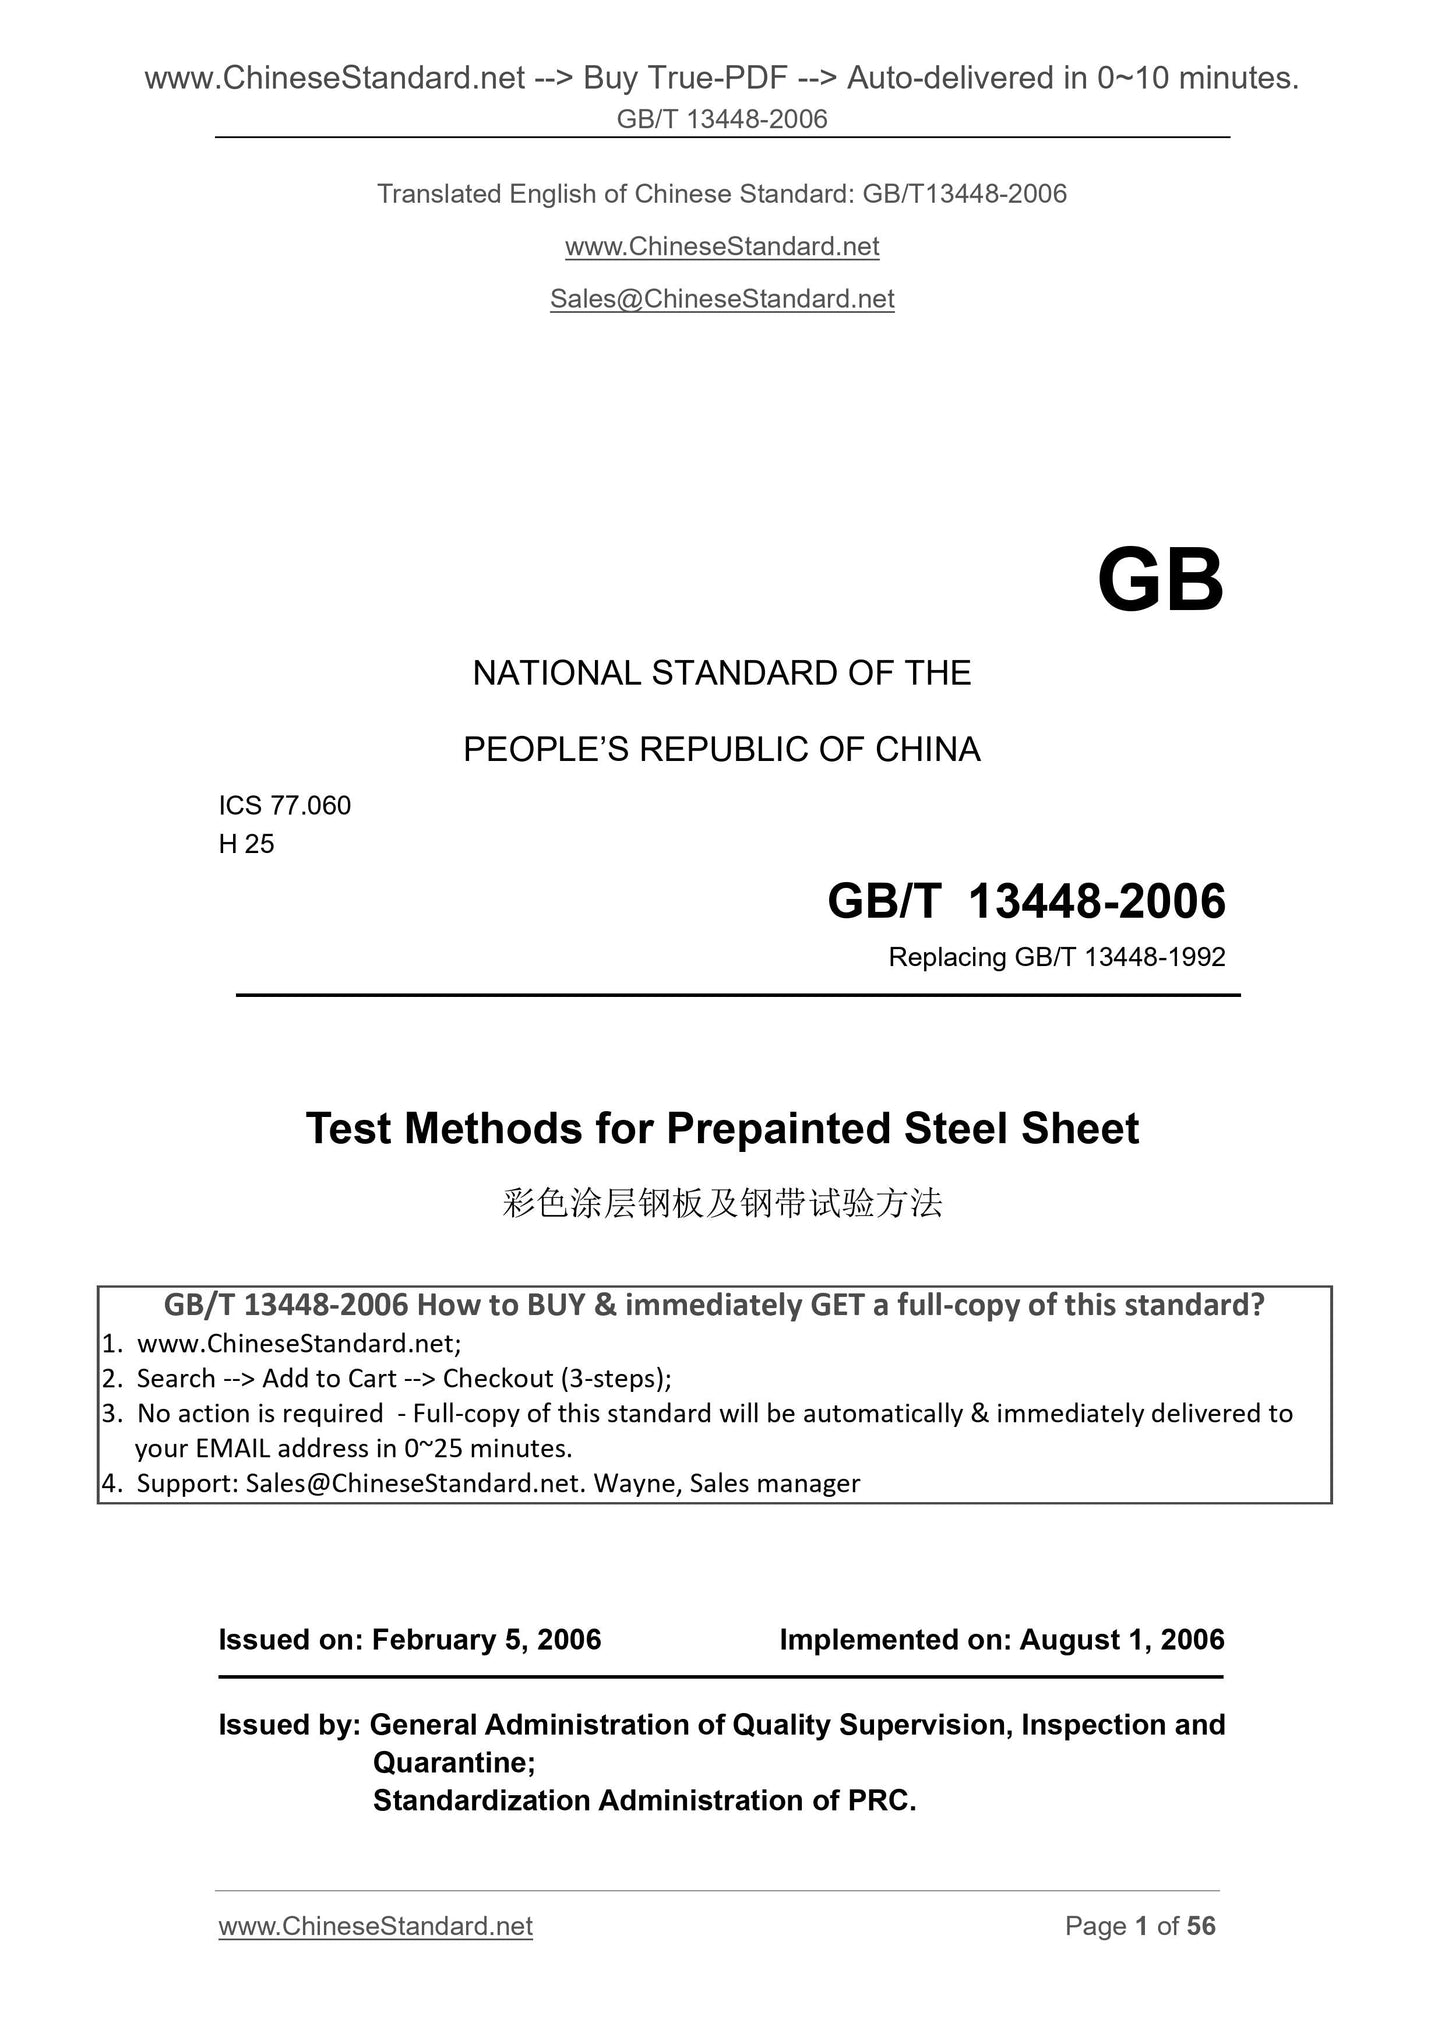 GB/T 13448-2006 Page 1